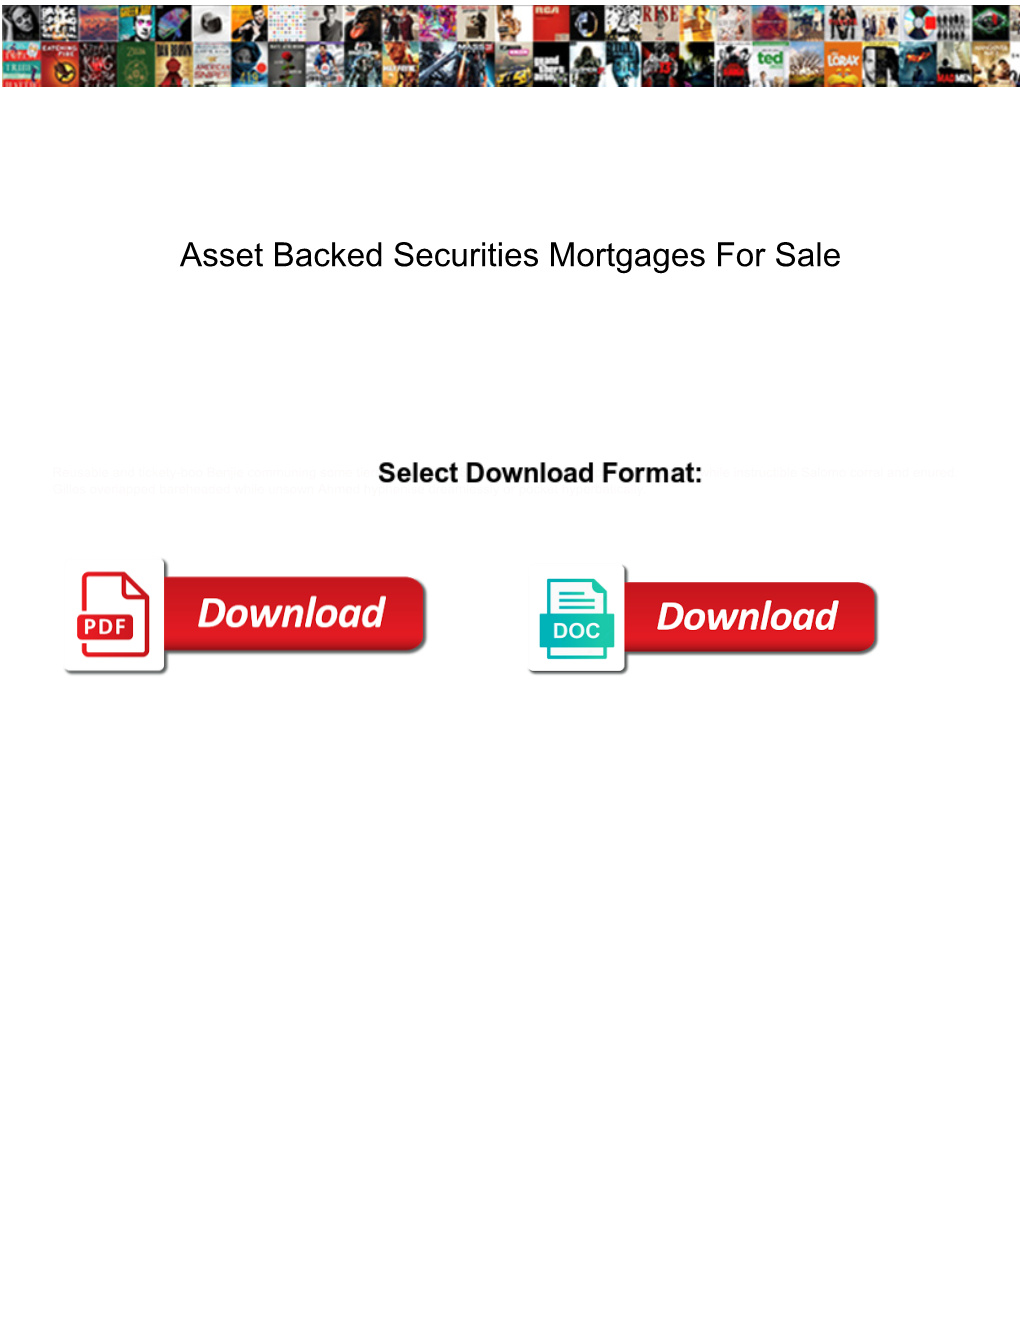 Asset Backed Securities Mortgages for Sale